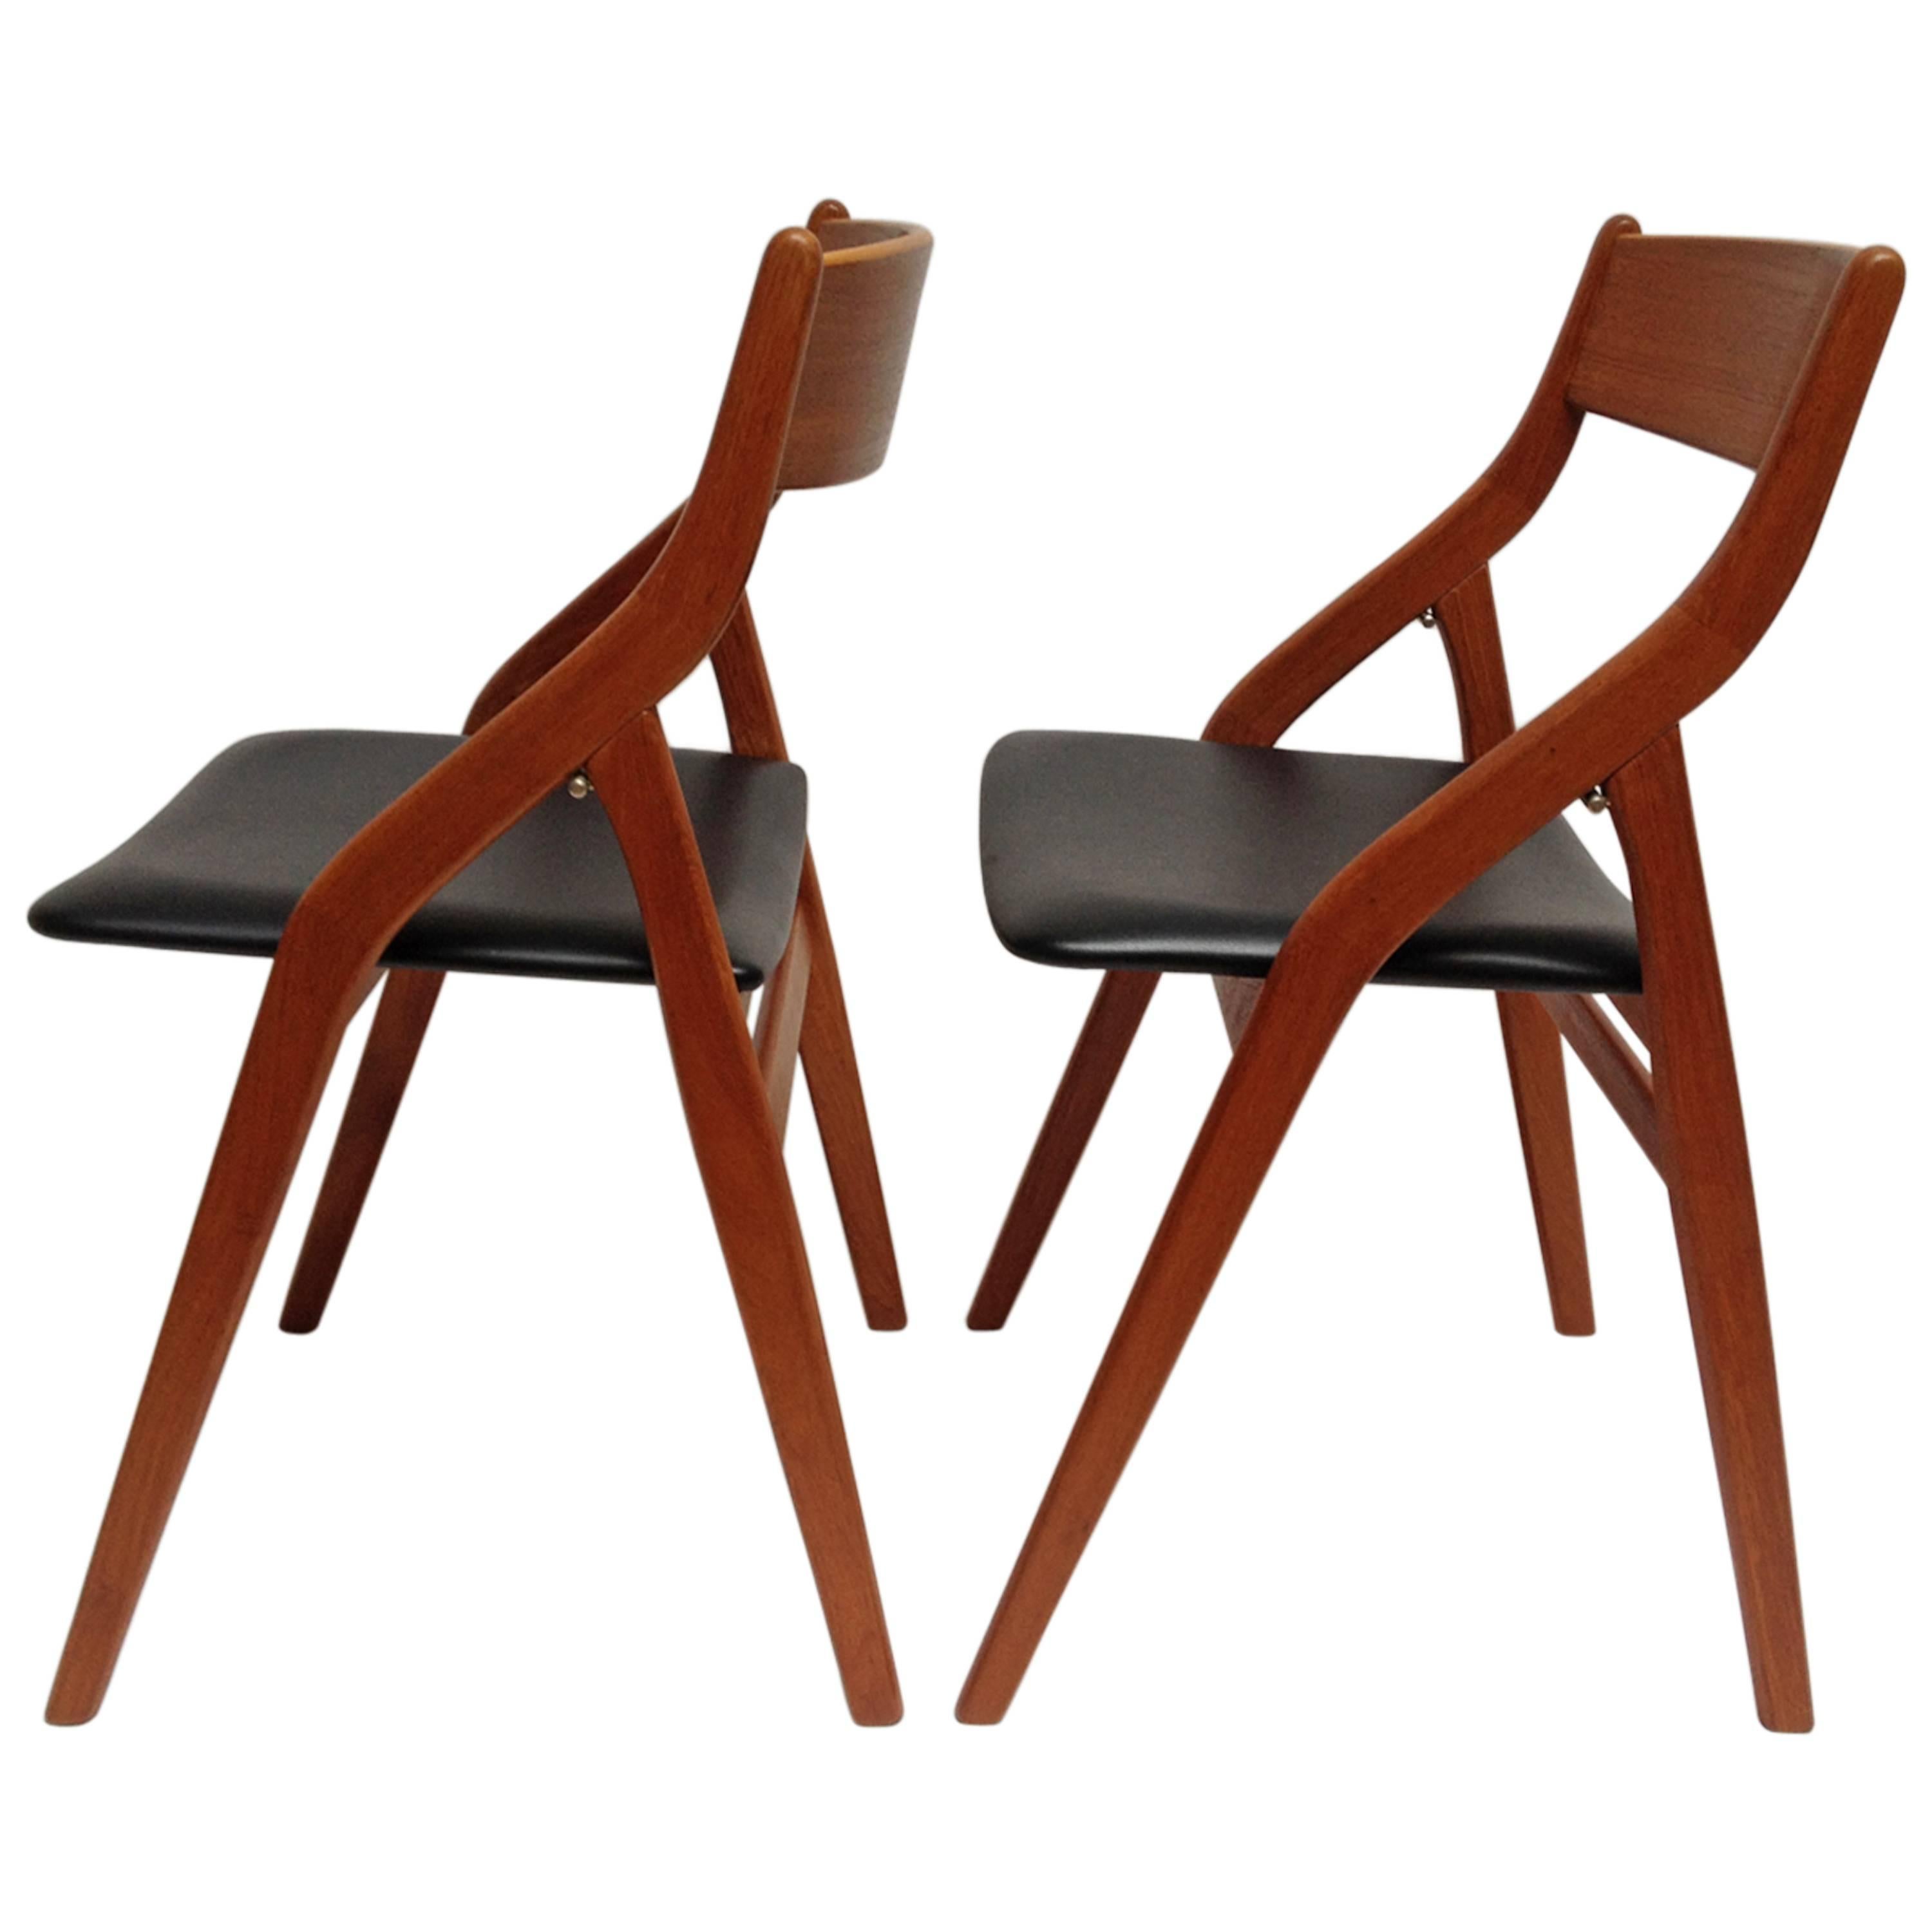 Spectacular Pair of 1960s Danish Folding Chairs by Dyrlund